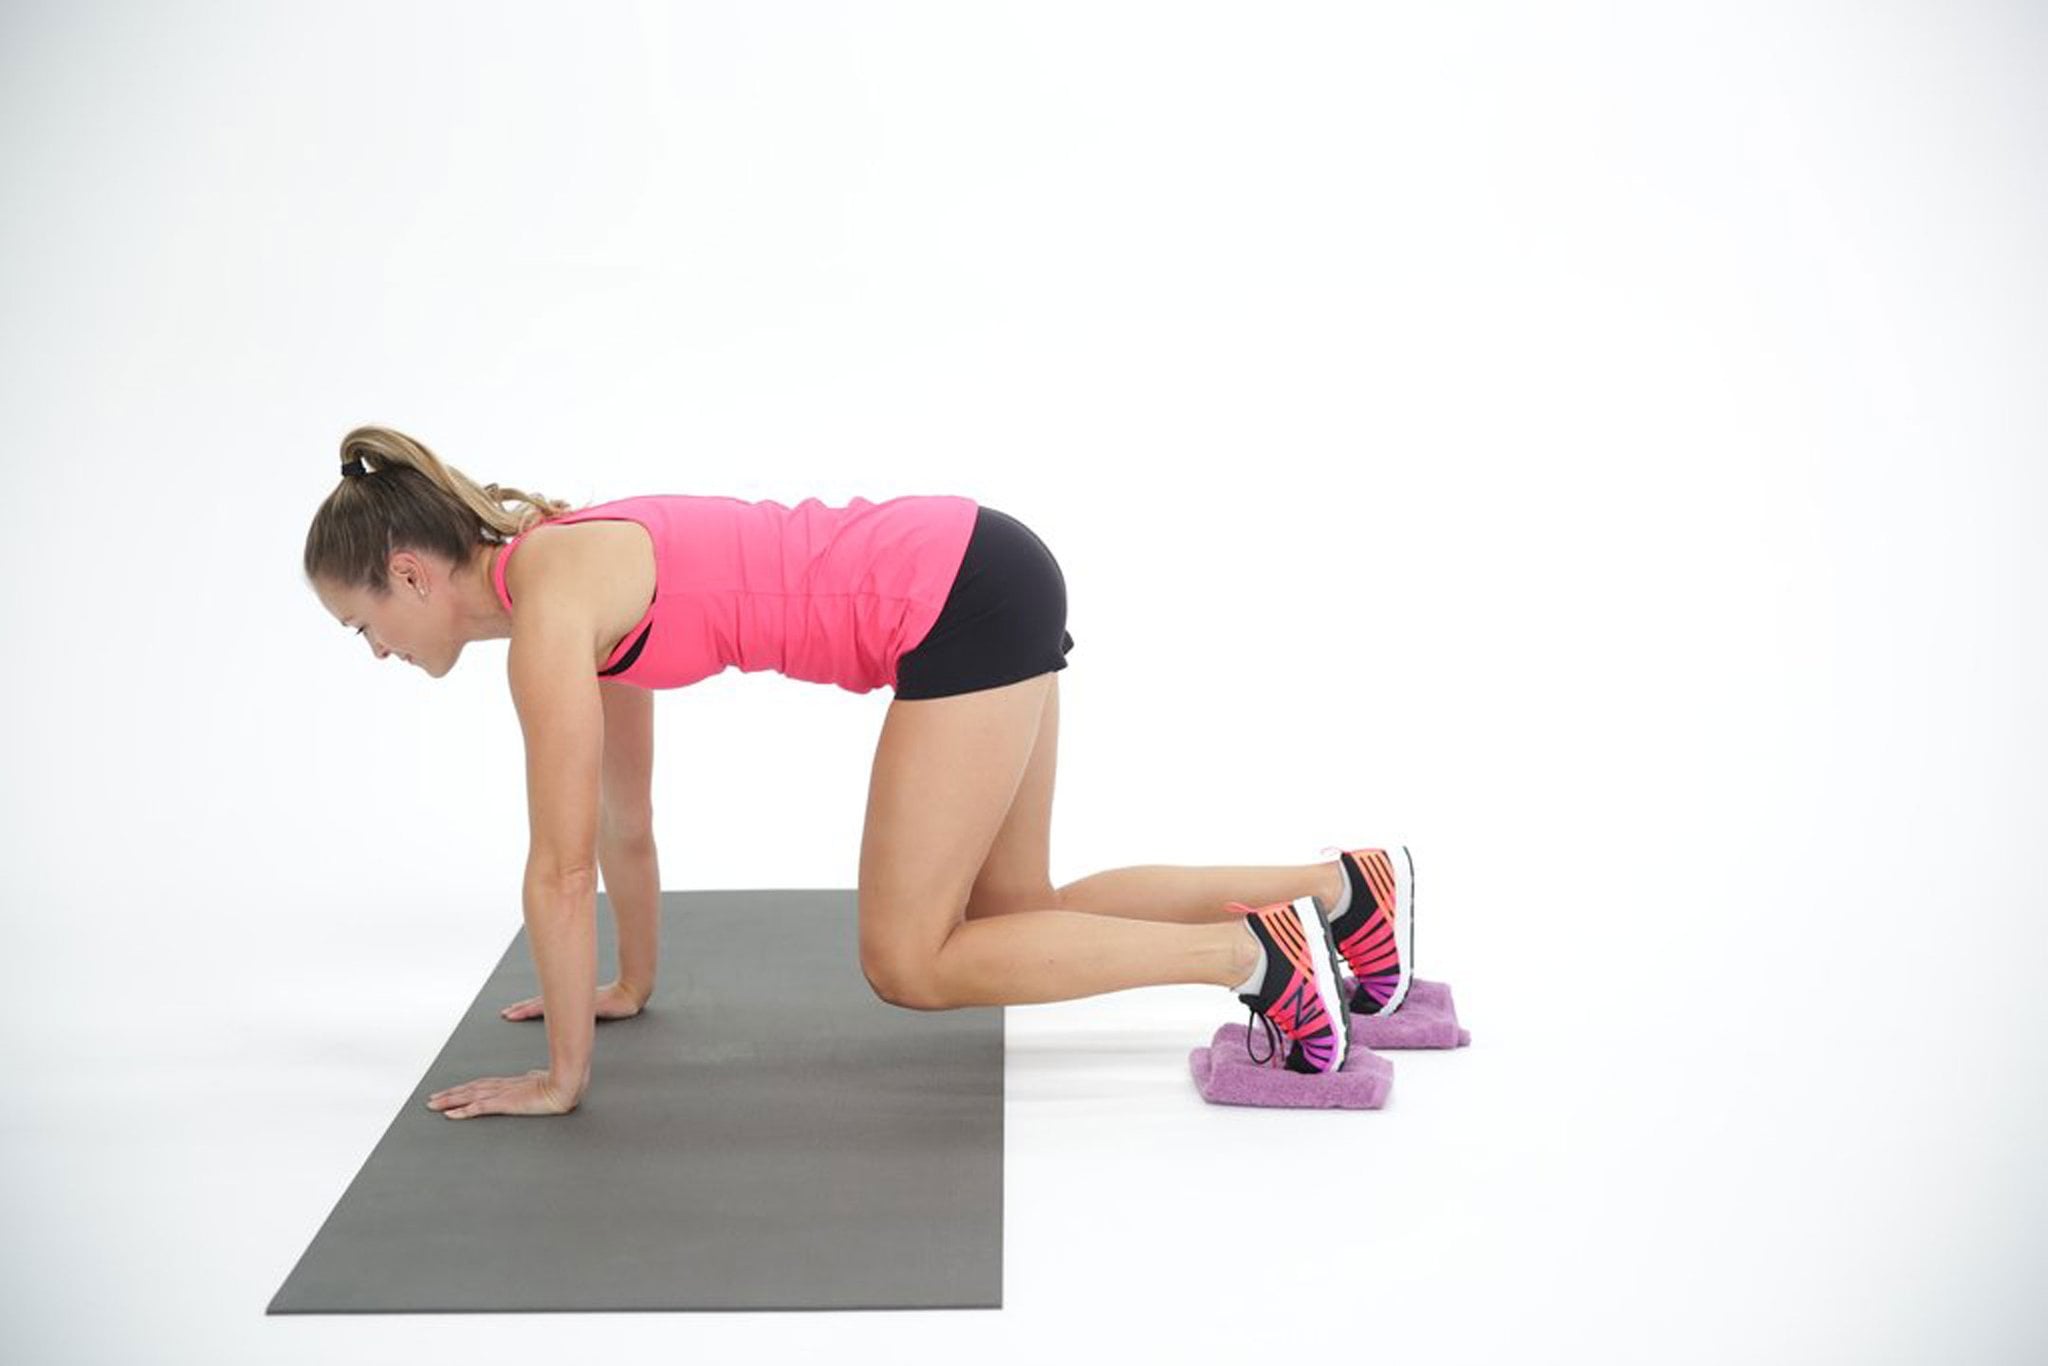 4 Slider Exercises That Will Take Your Workouts to the Next Level